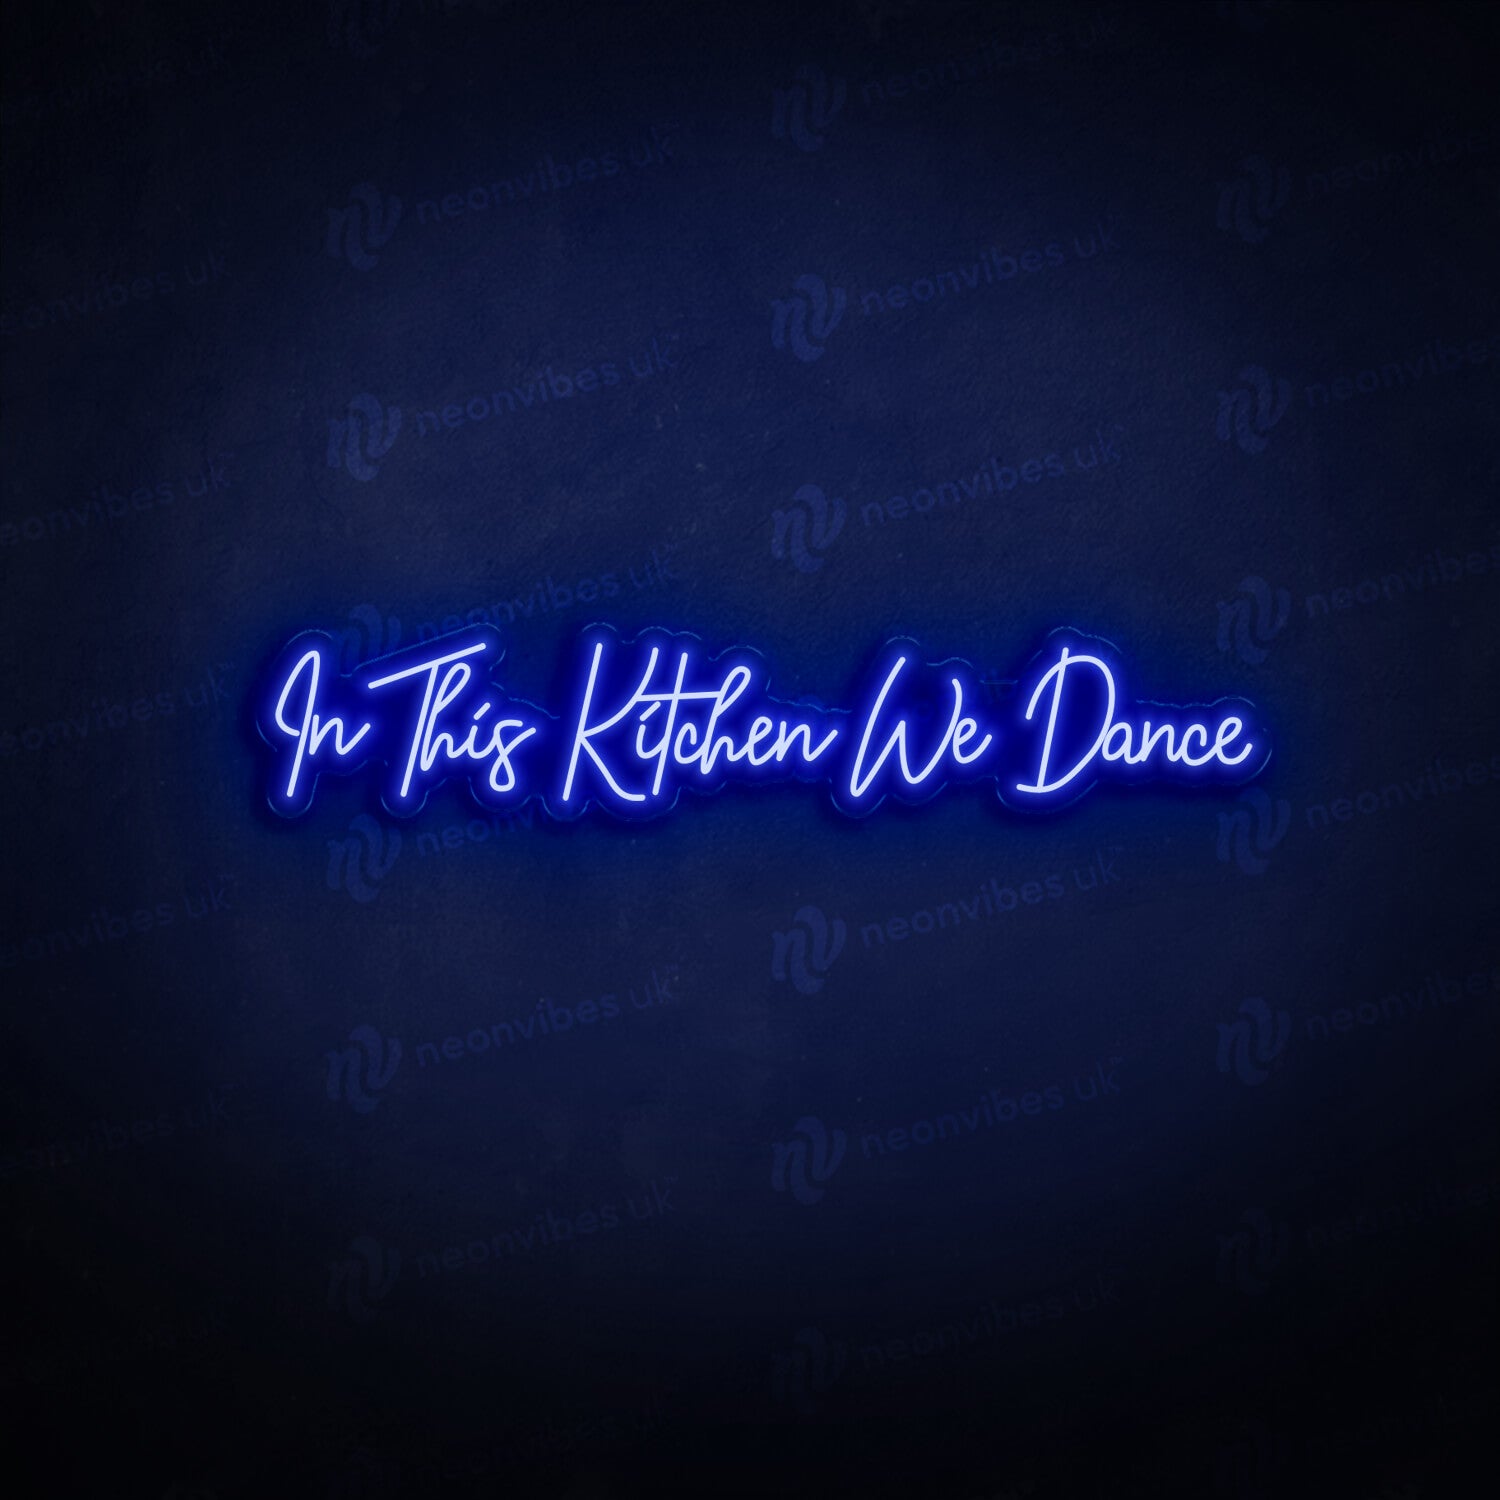 In this kitchen we dance neon sign